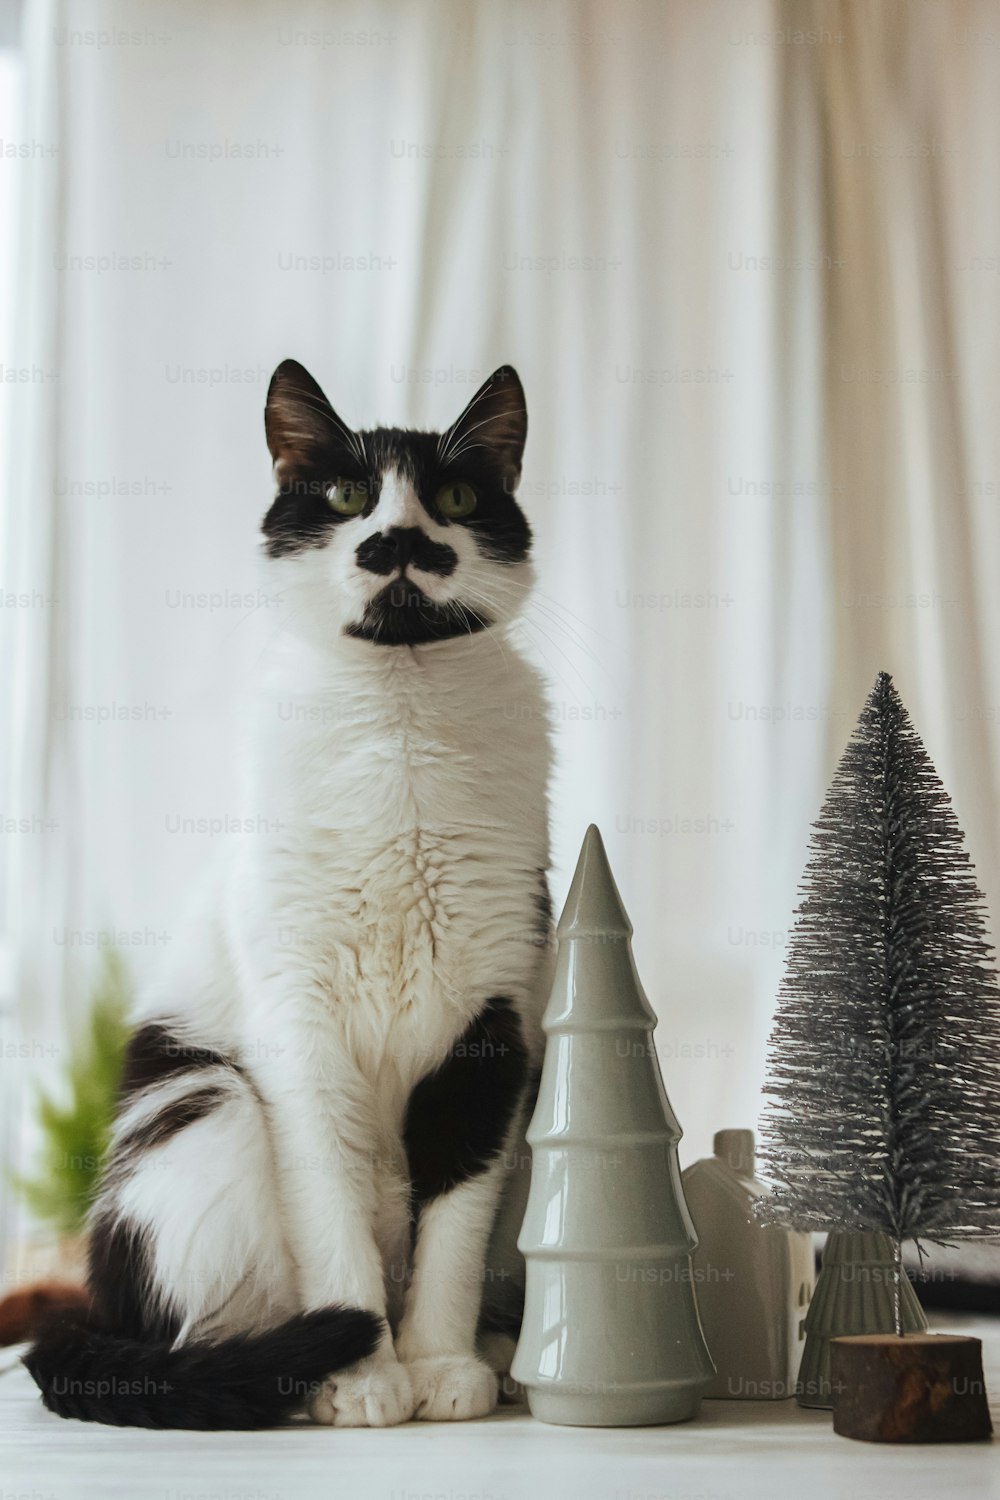 Cute cat sitting at modern christmas decorations, little trees and houses. Cute black and white cat posing at miniature village, house and christmas trees in festive room. Merry Christmas!